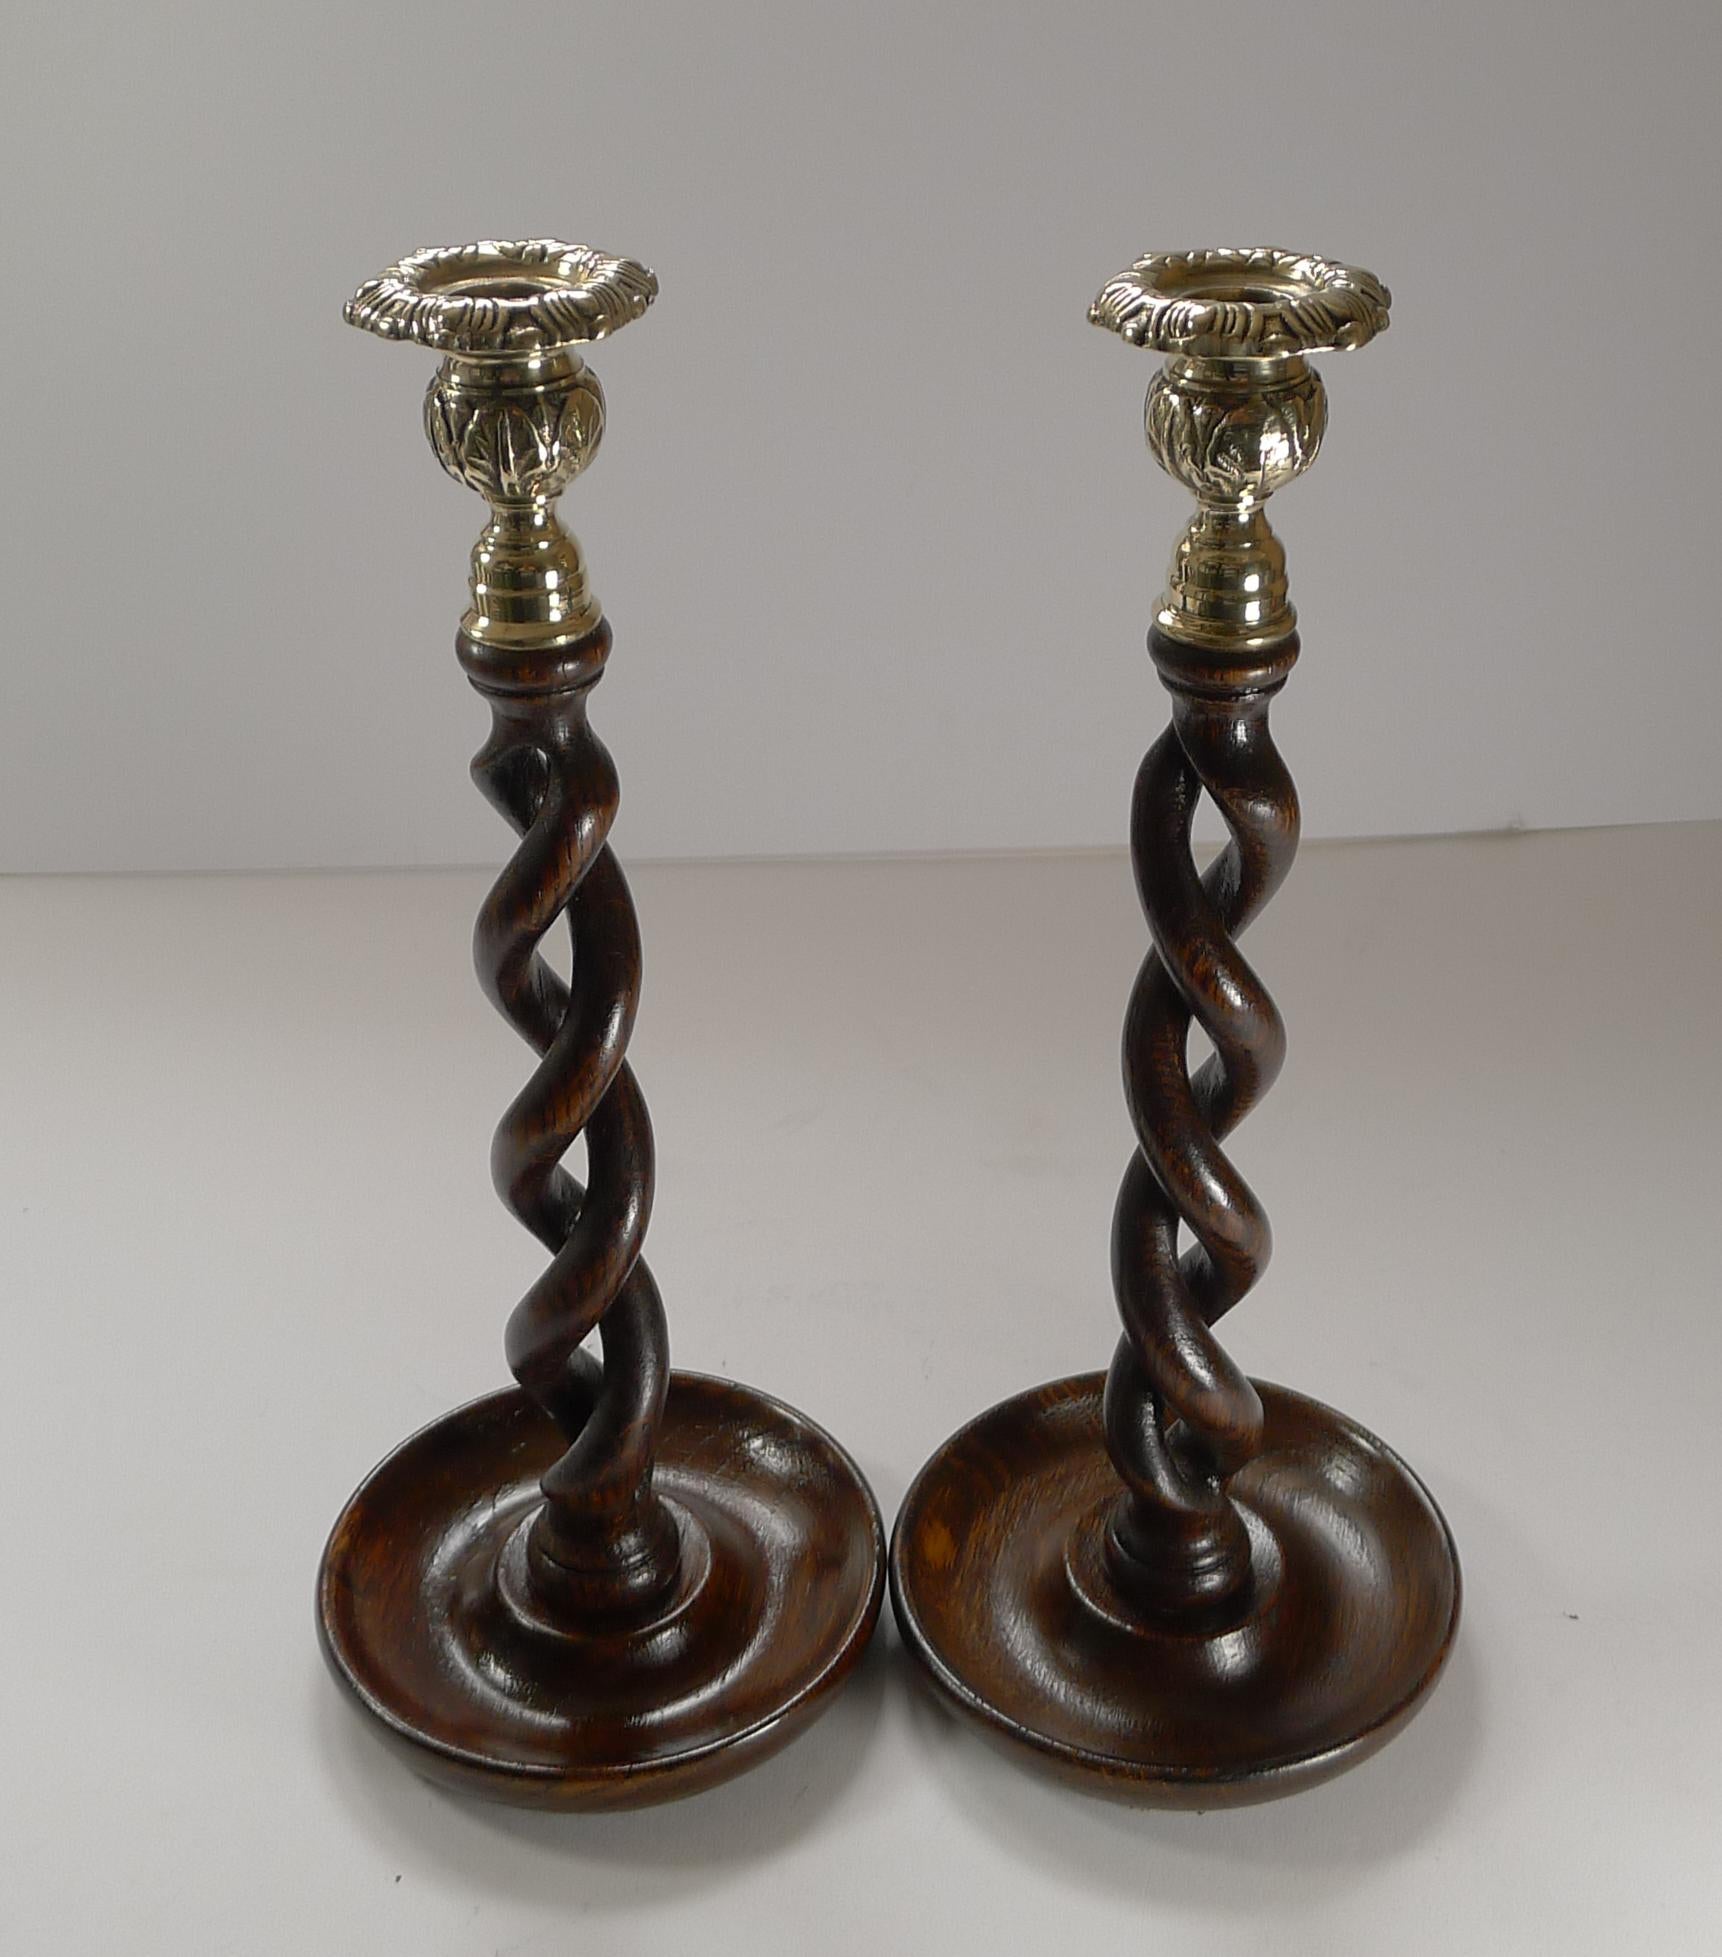 A handsome pair of antique oak candlesticks, and with much skill were lovingly carved, with an open barley twist design.

The tops have decorative brass tops, a winning combination with the rich coloured Oak.

A good size measuring 12 3/4